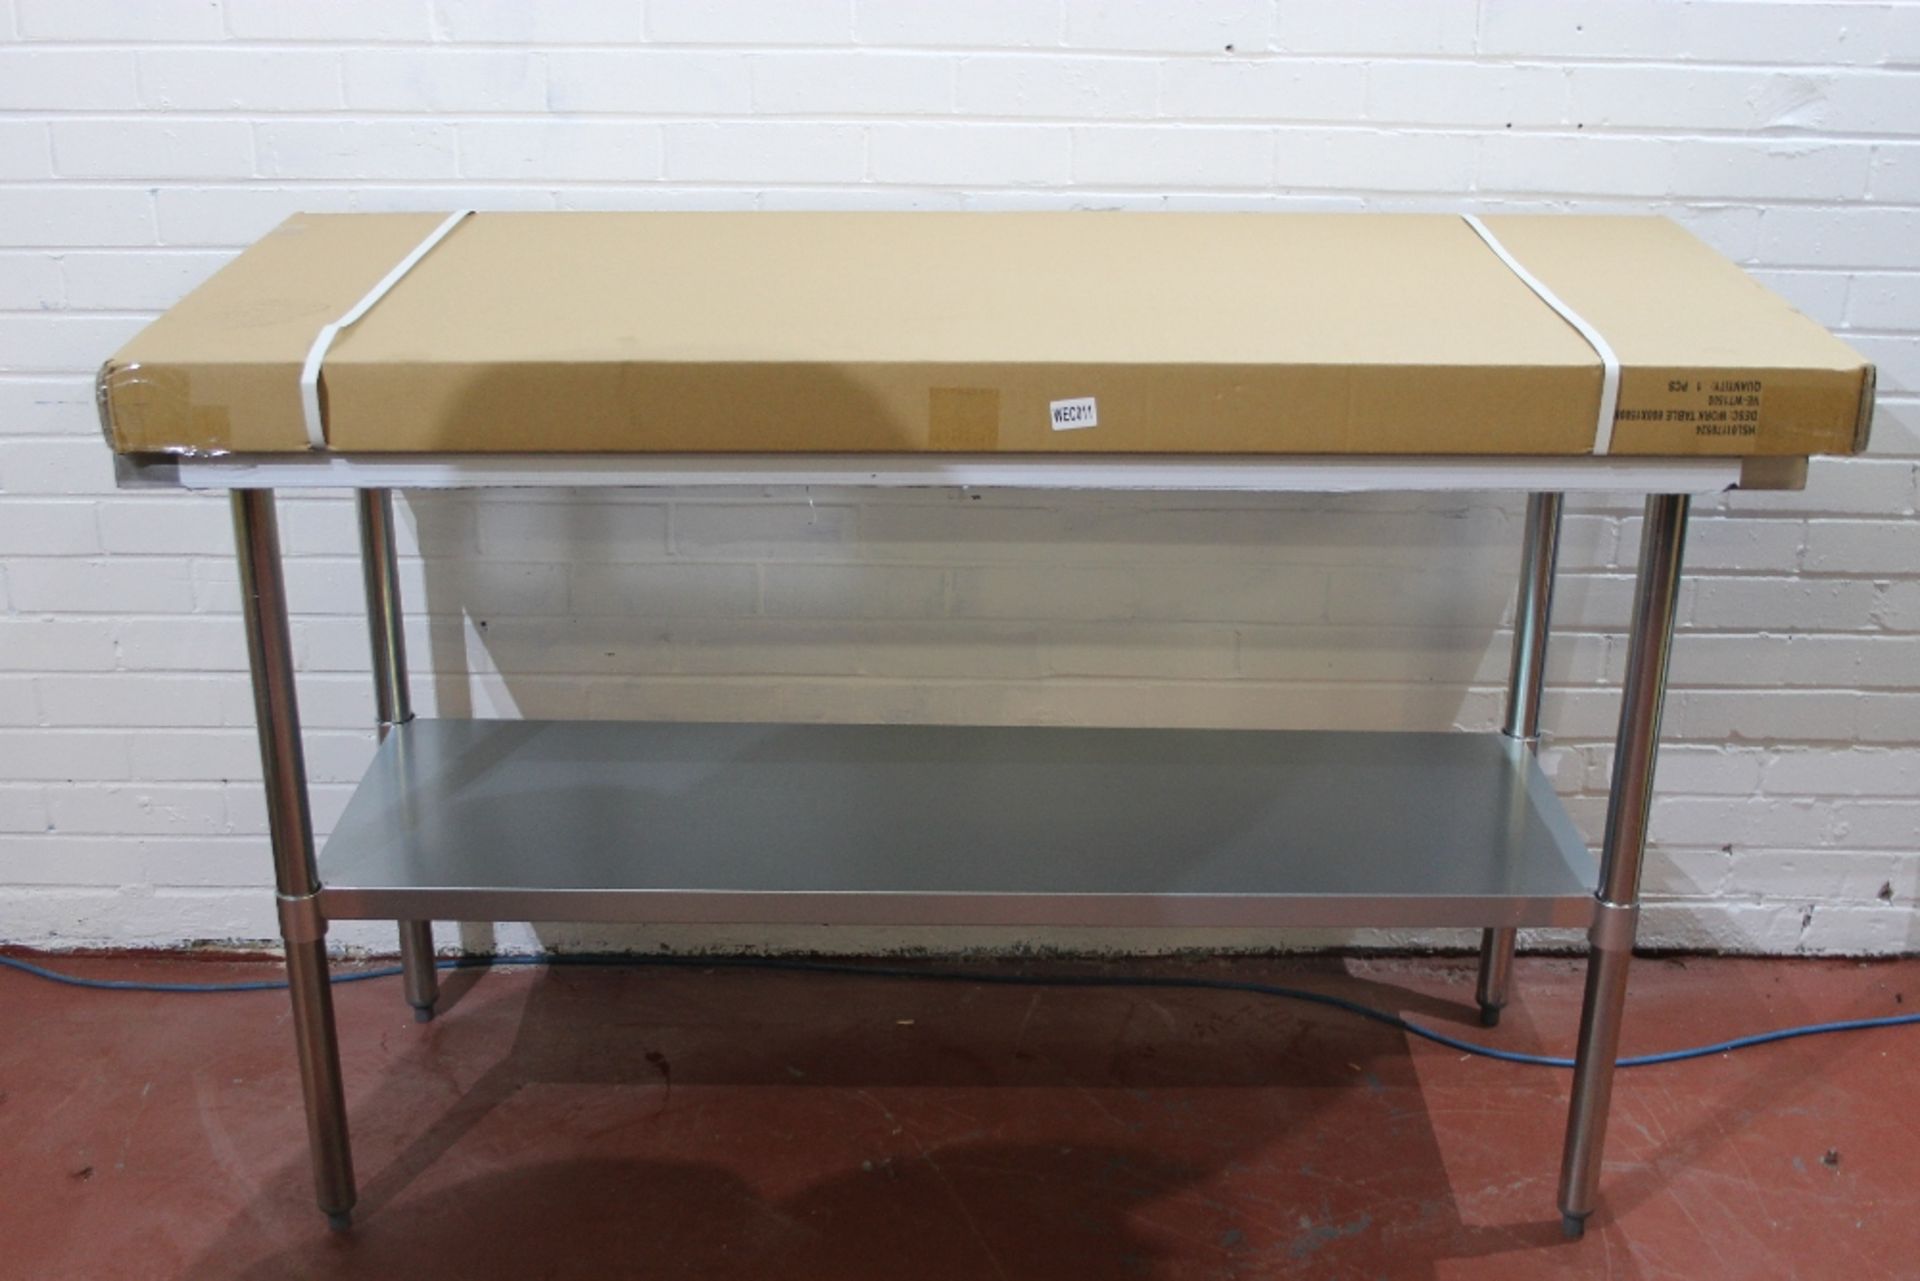 New Stainless Steel Table – Boxed – 1500 x 600 mm - Image 2 of 2